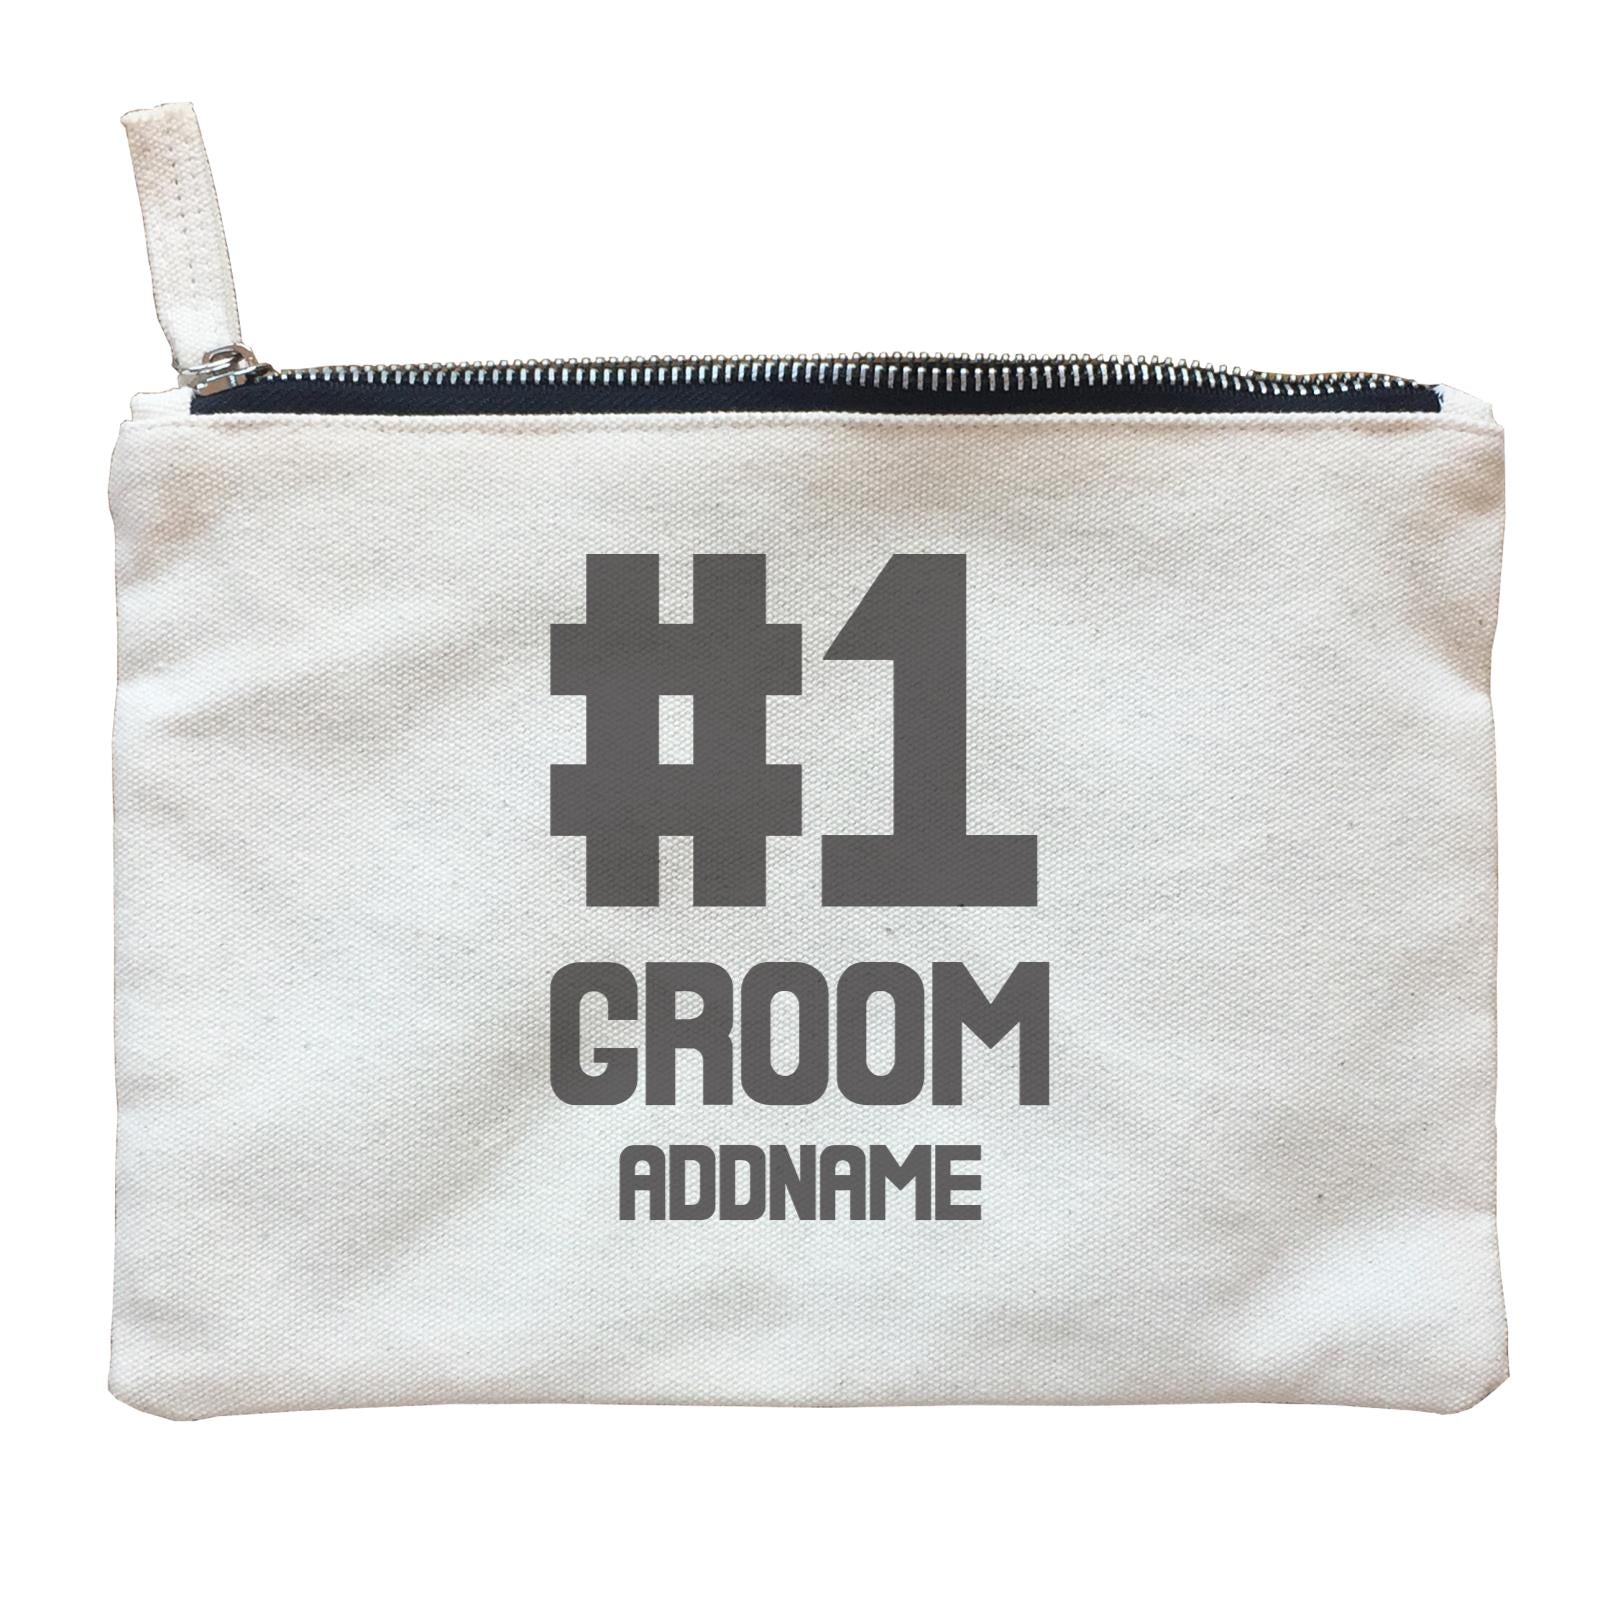 Wedding Couple Western Hashtag No 1 Groom Addname Zipper Pouch